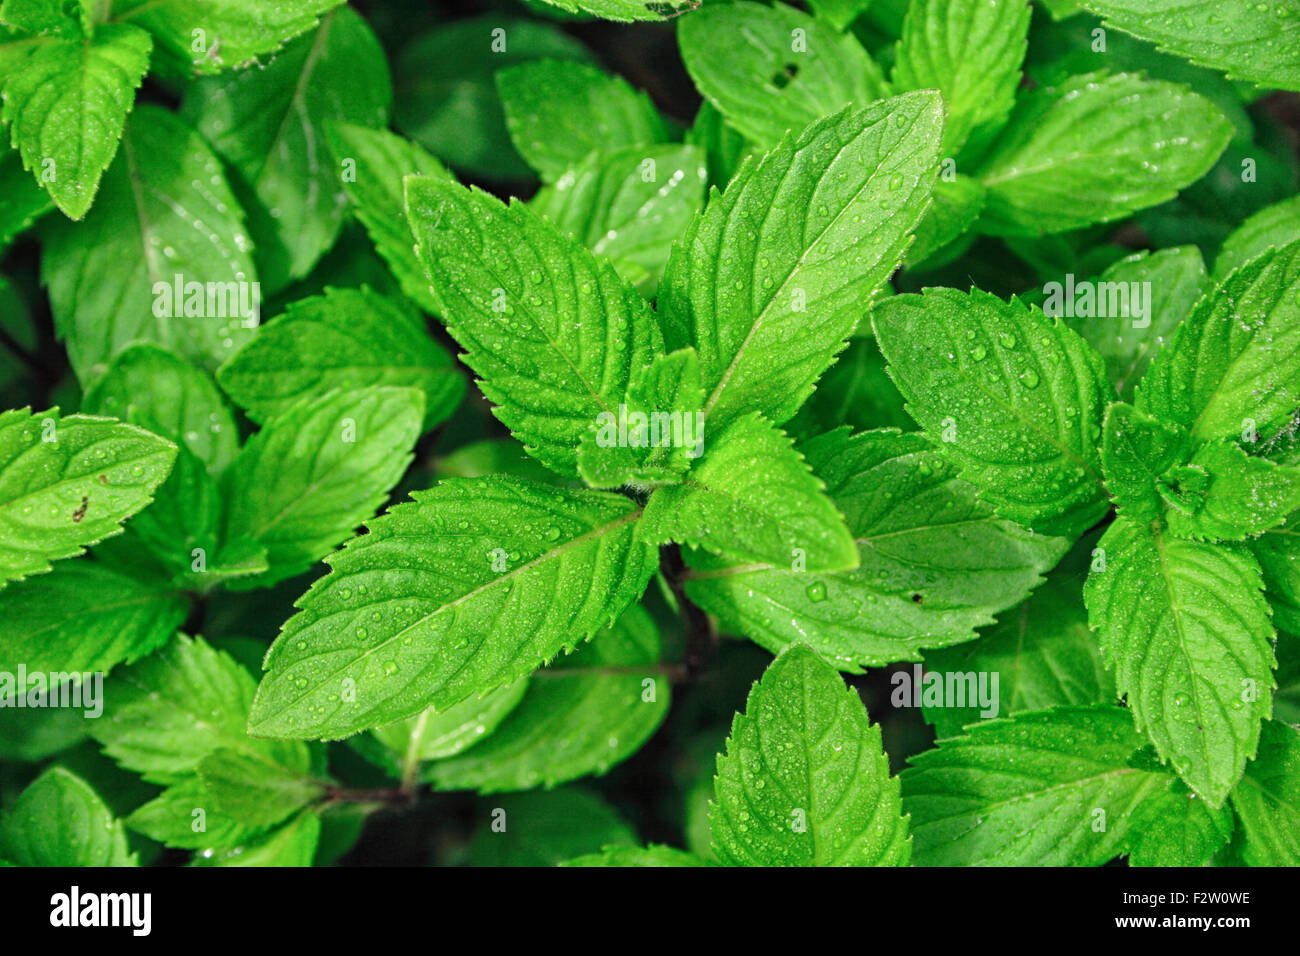 Closeup picture of mint leaves Stock Photo